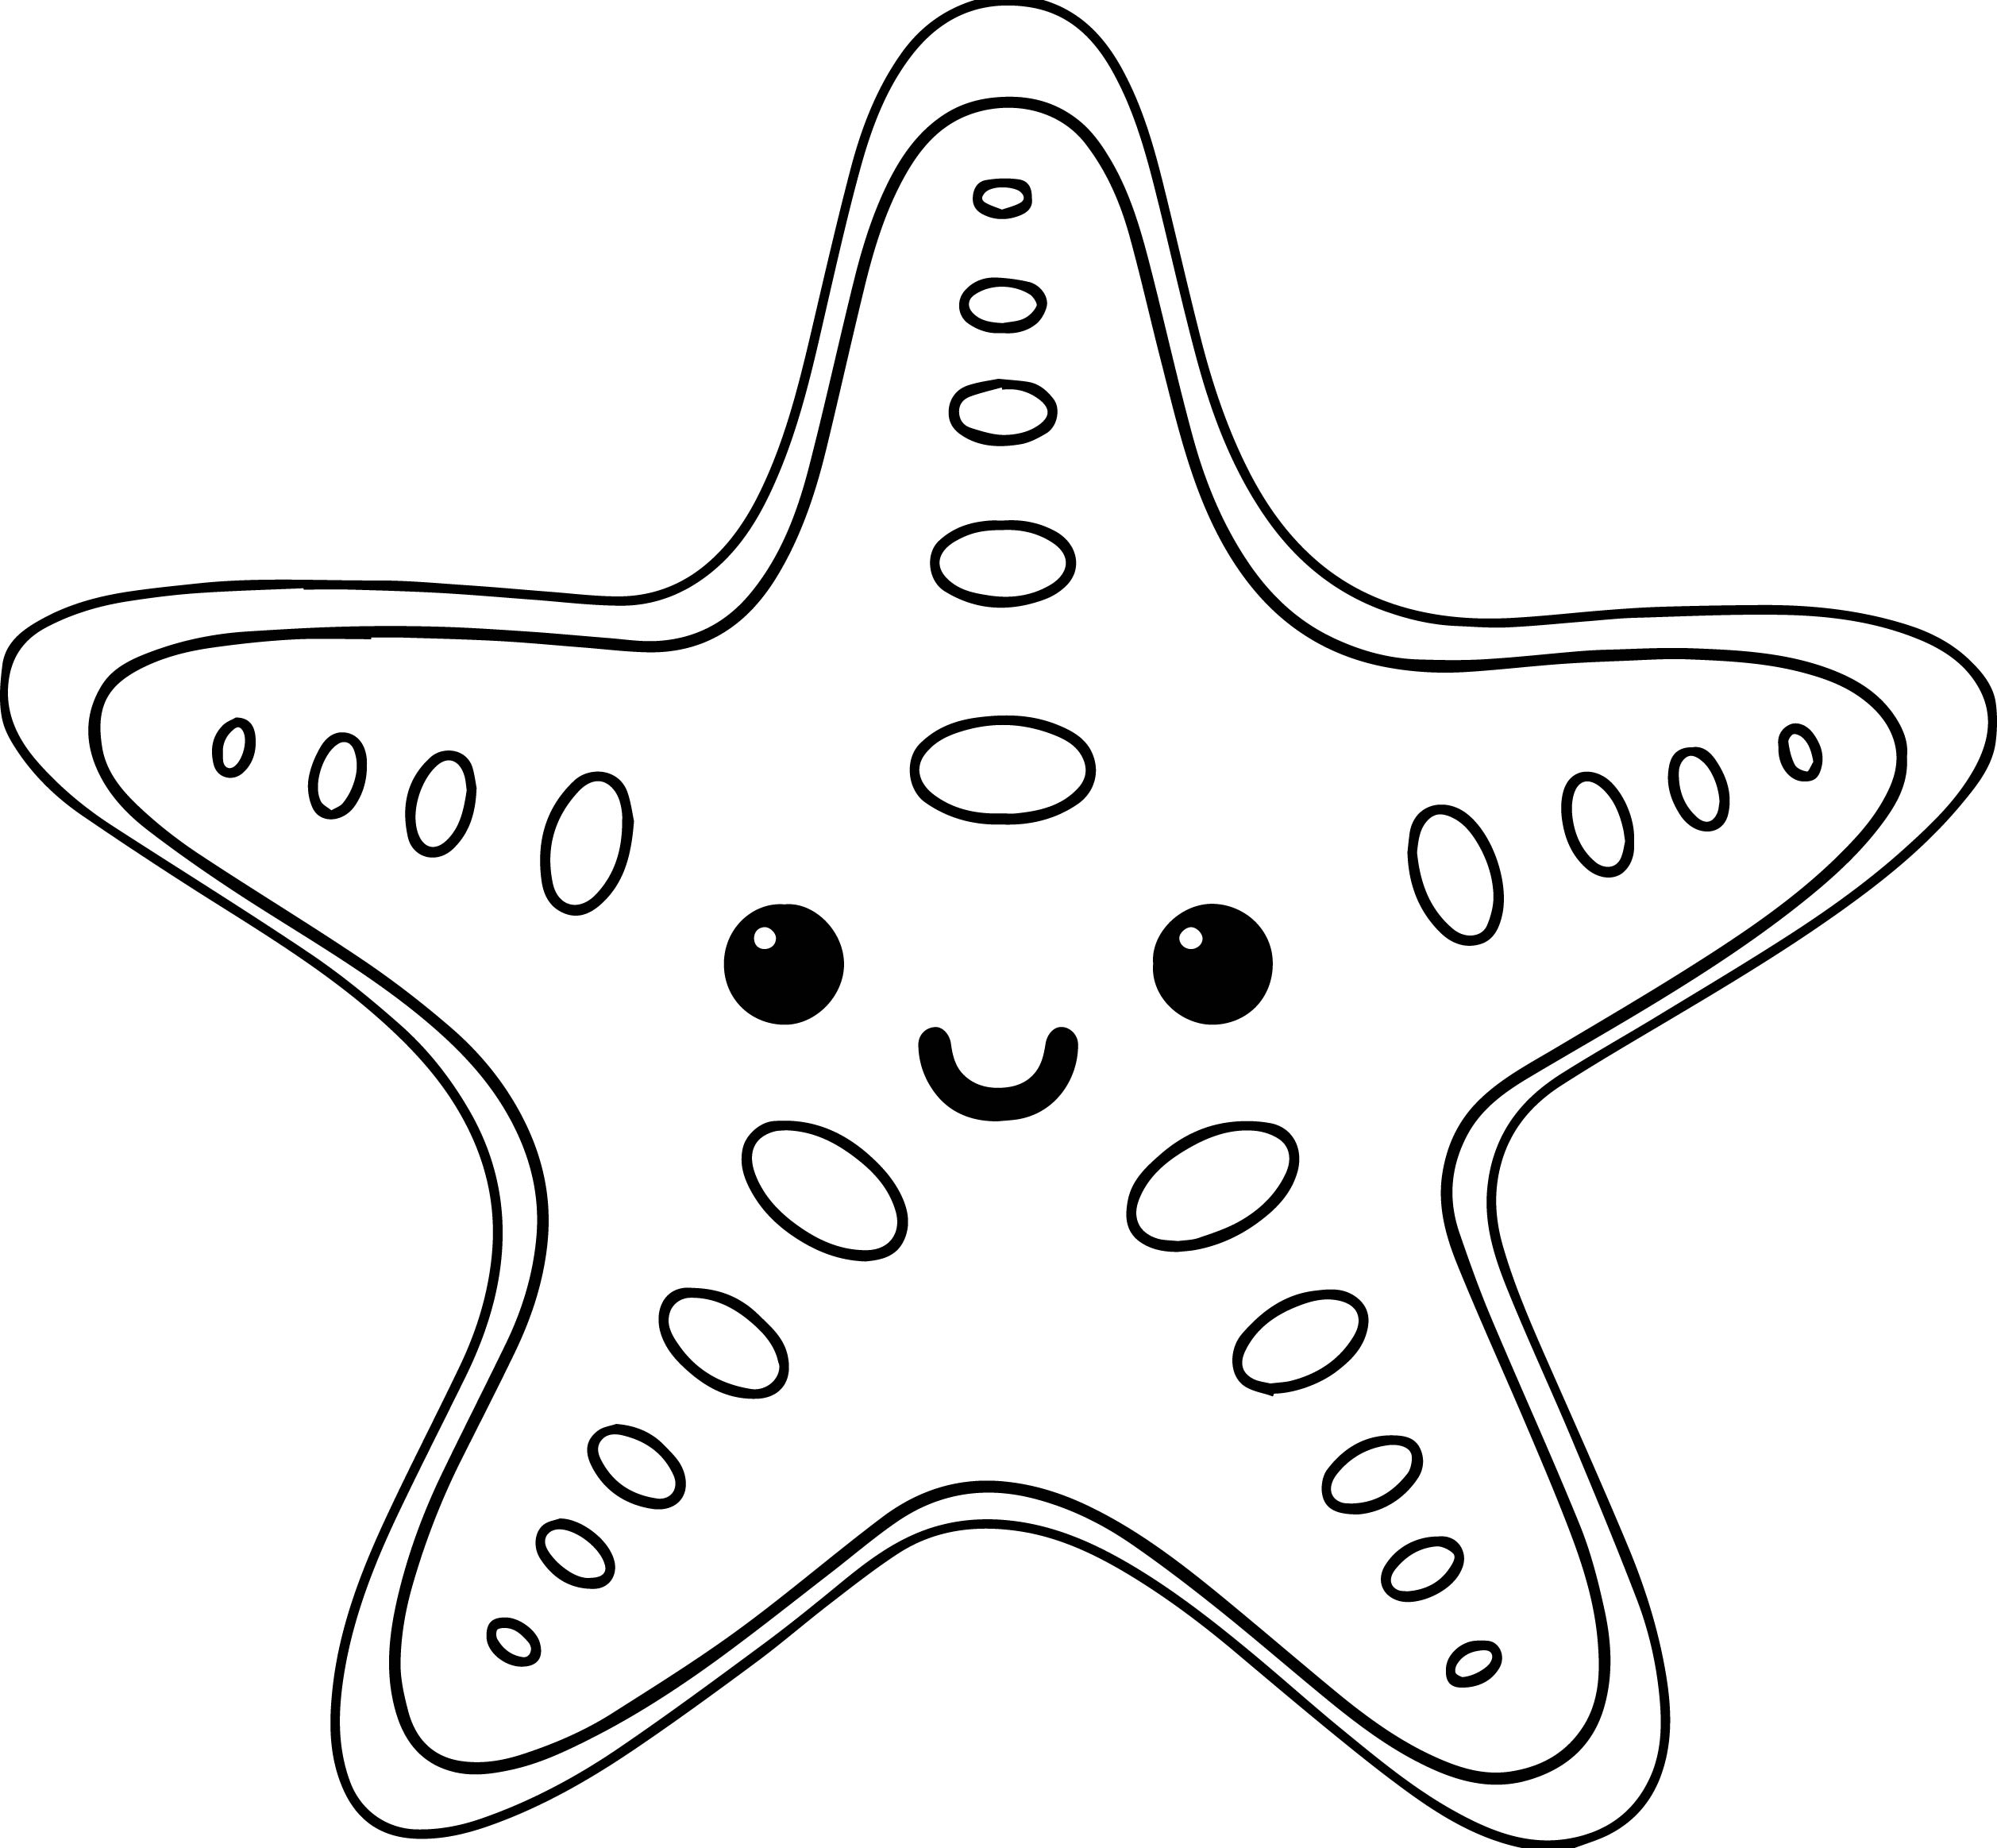 Starfish Drawing For Kids at GetDrawings Free download